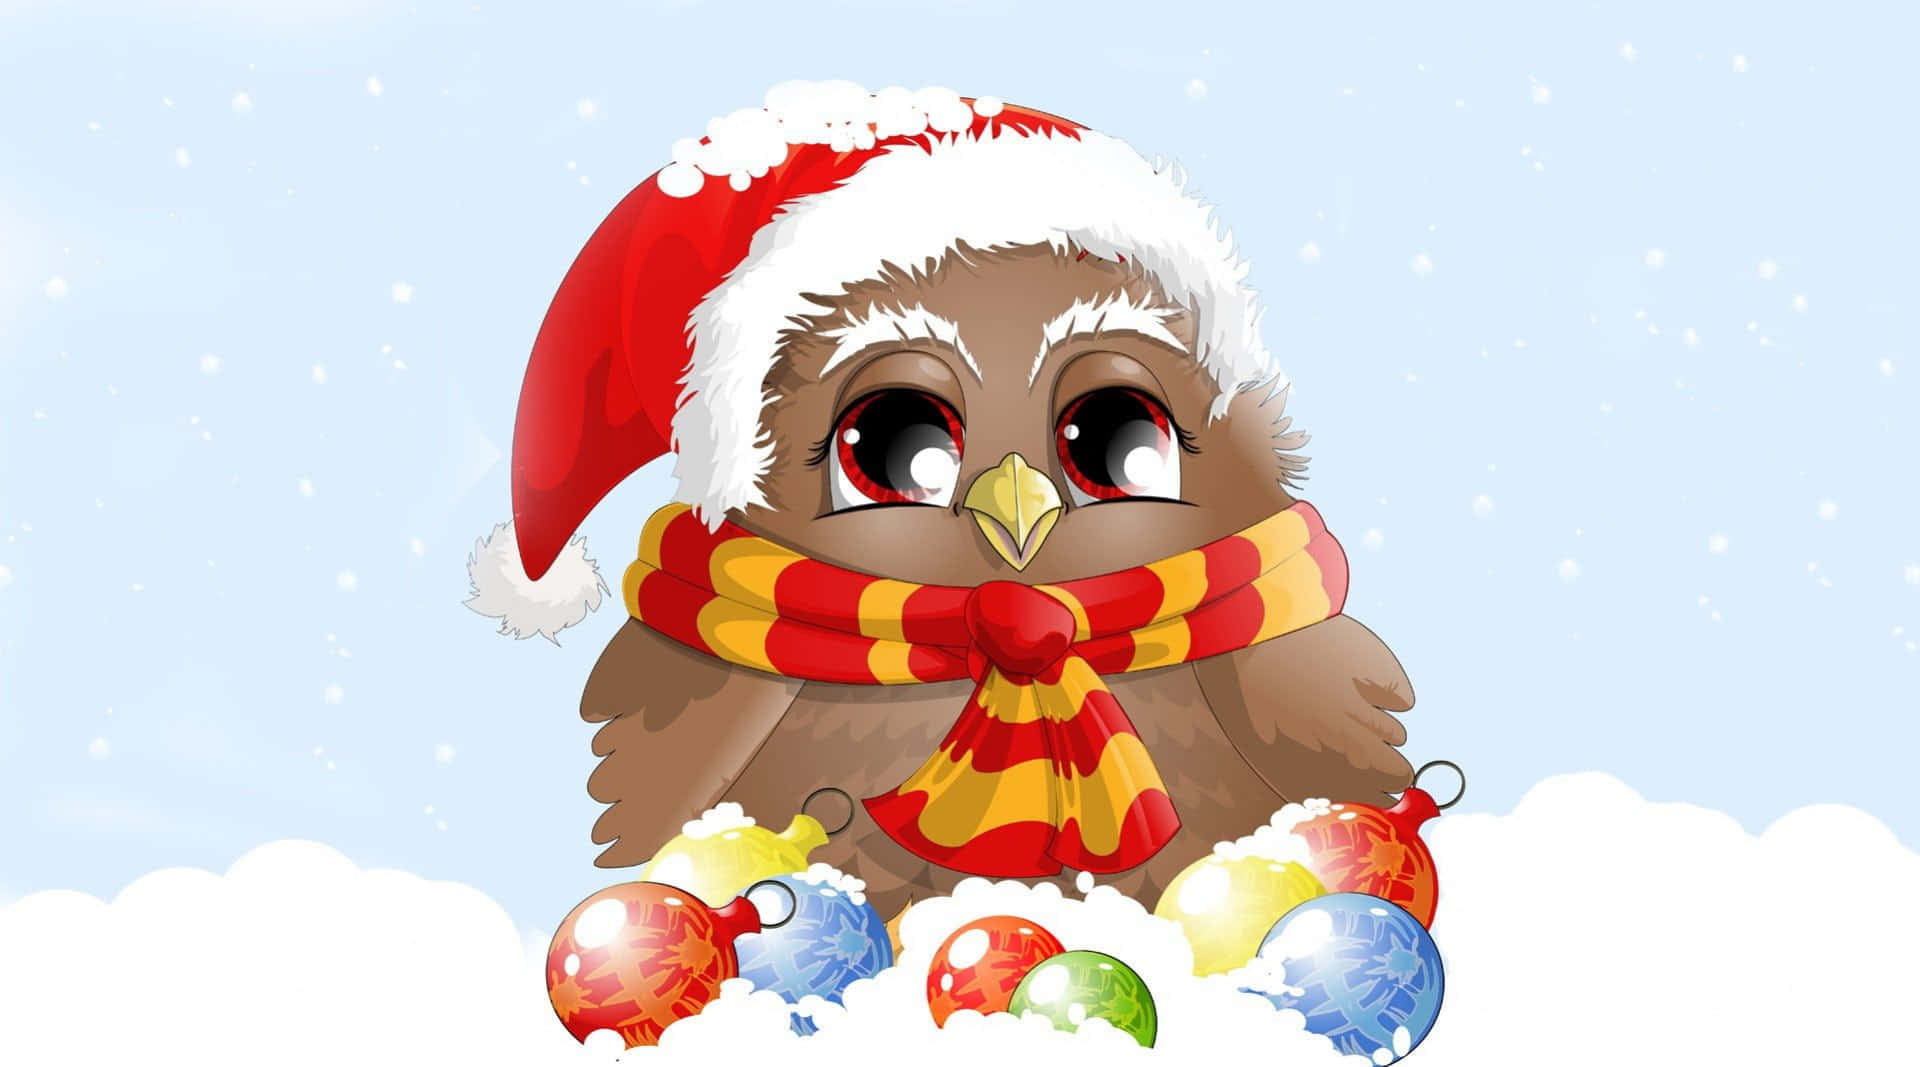 "Wise and Wonderful - Cute Owl Ready to Hoot!"